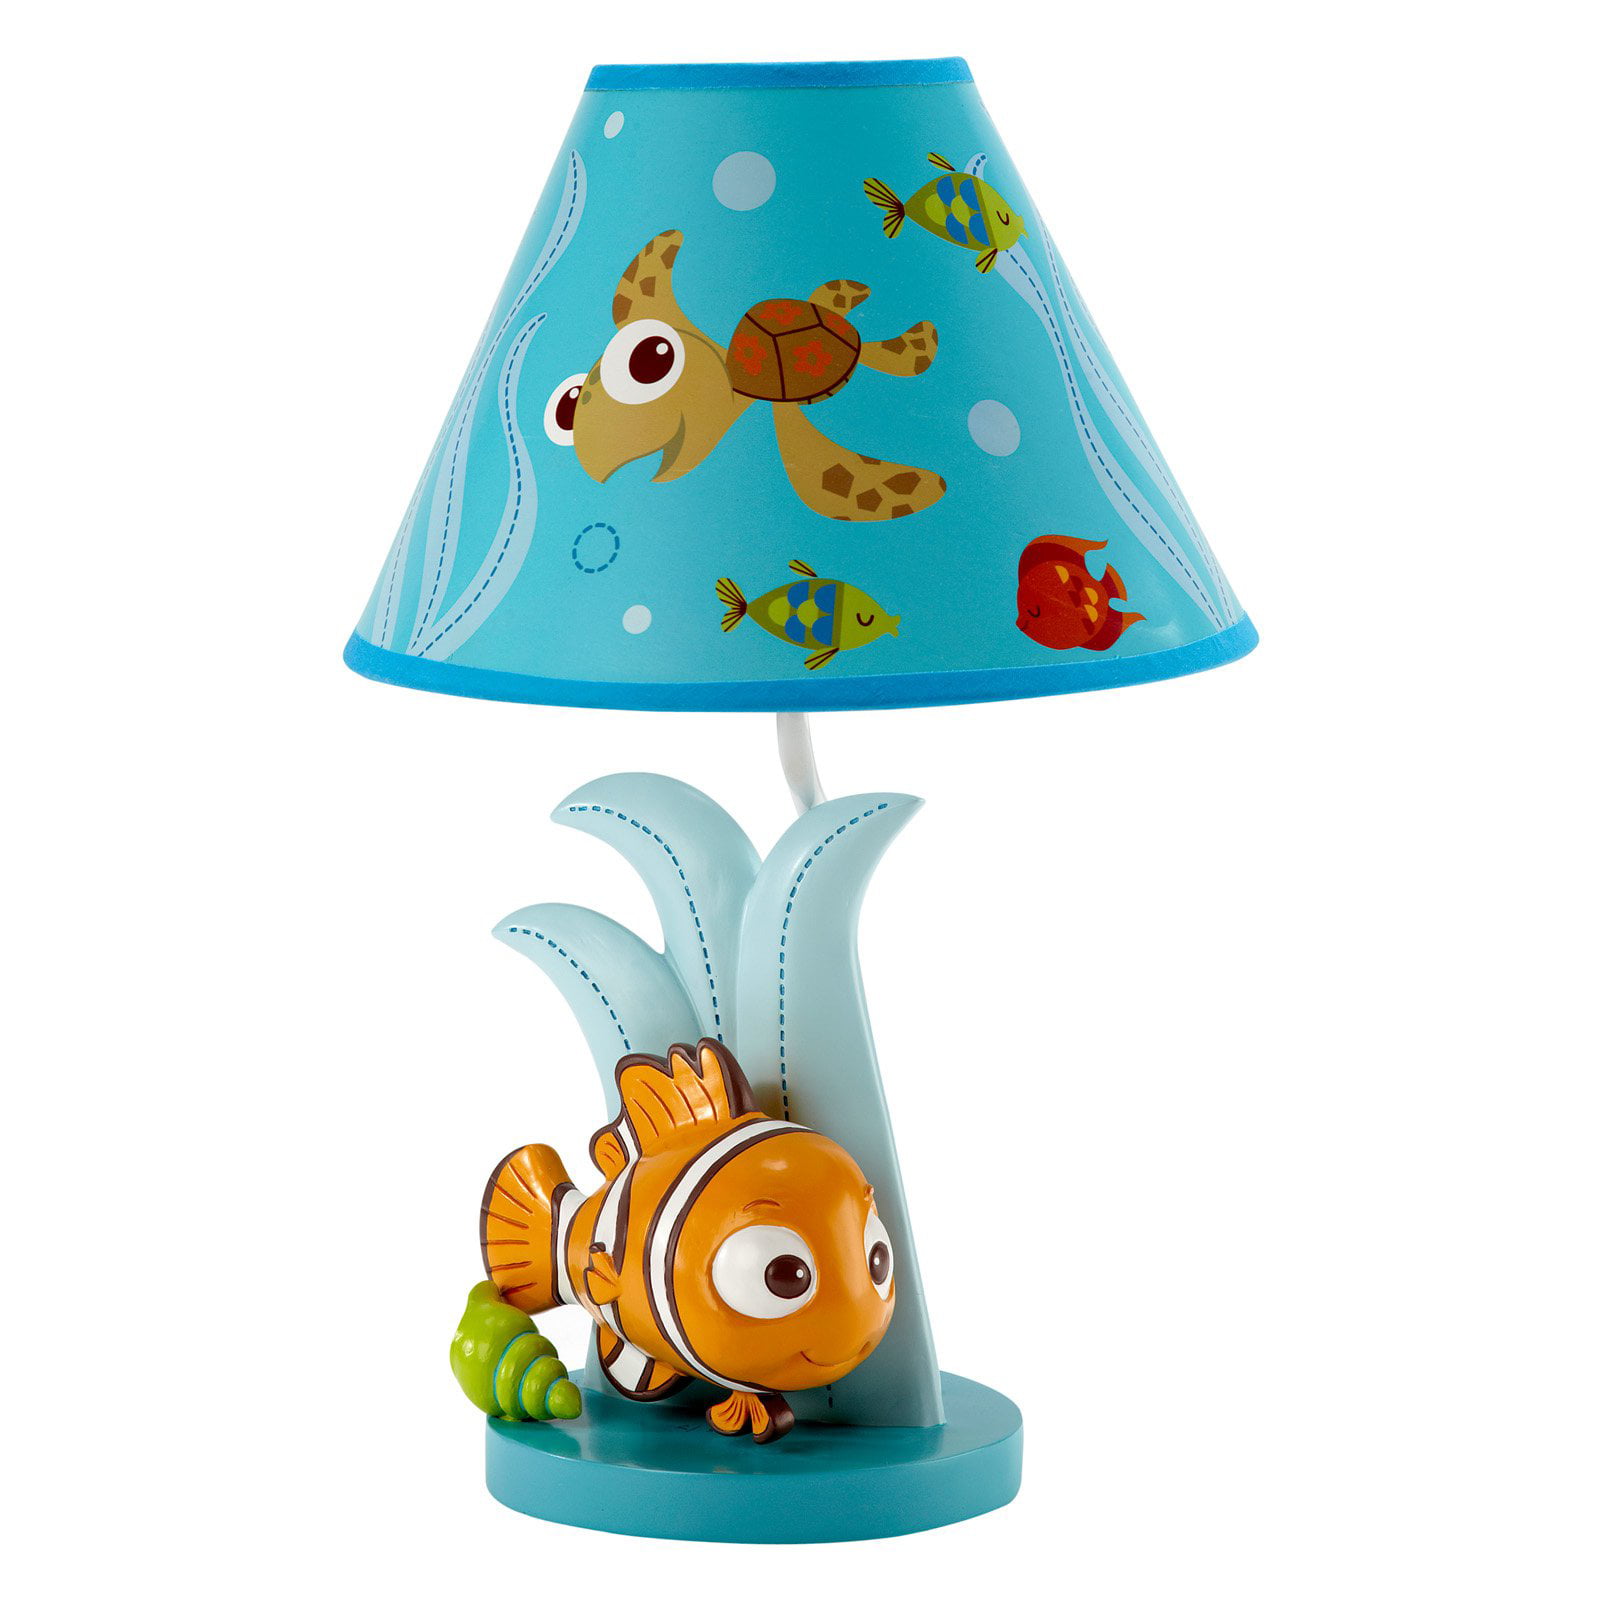 Finding Nemo Dory Childrens Lampshades Ceiling Light Table Lamp Bedding Curtains 